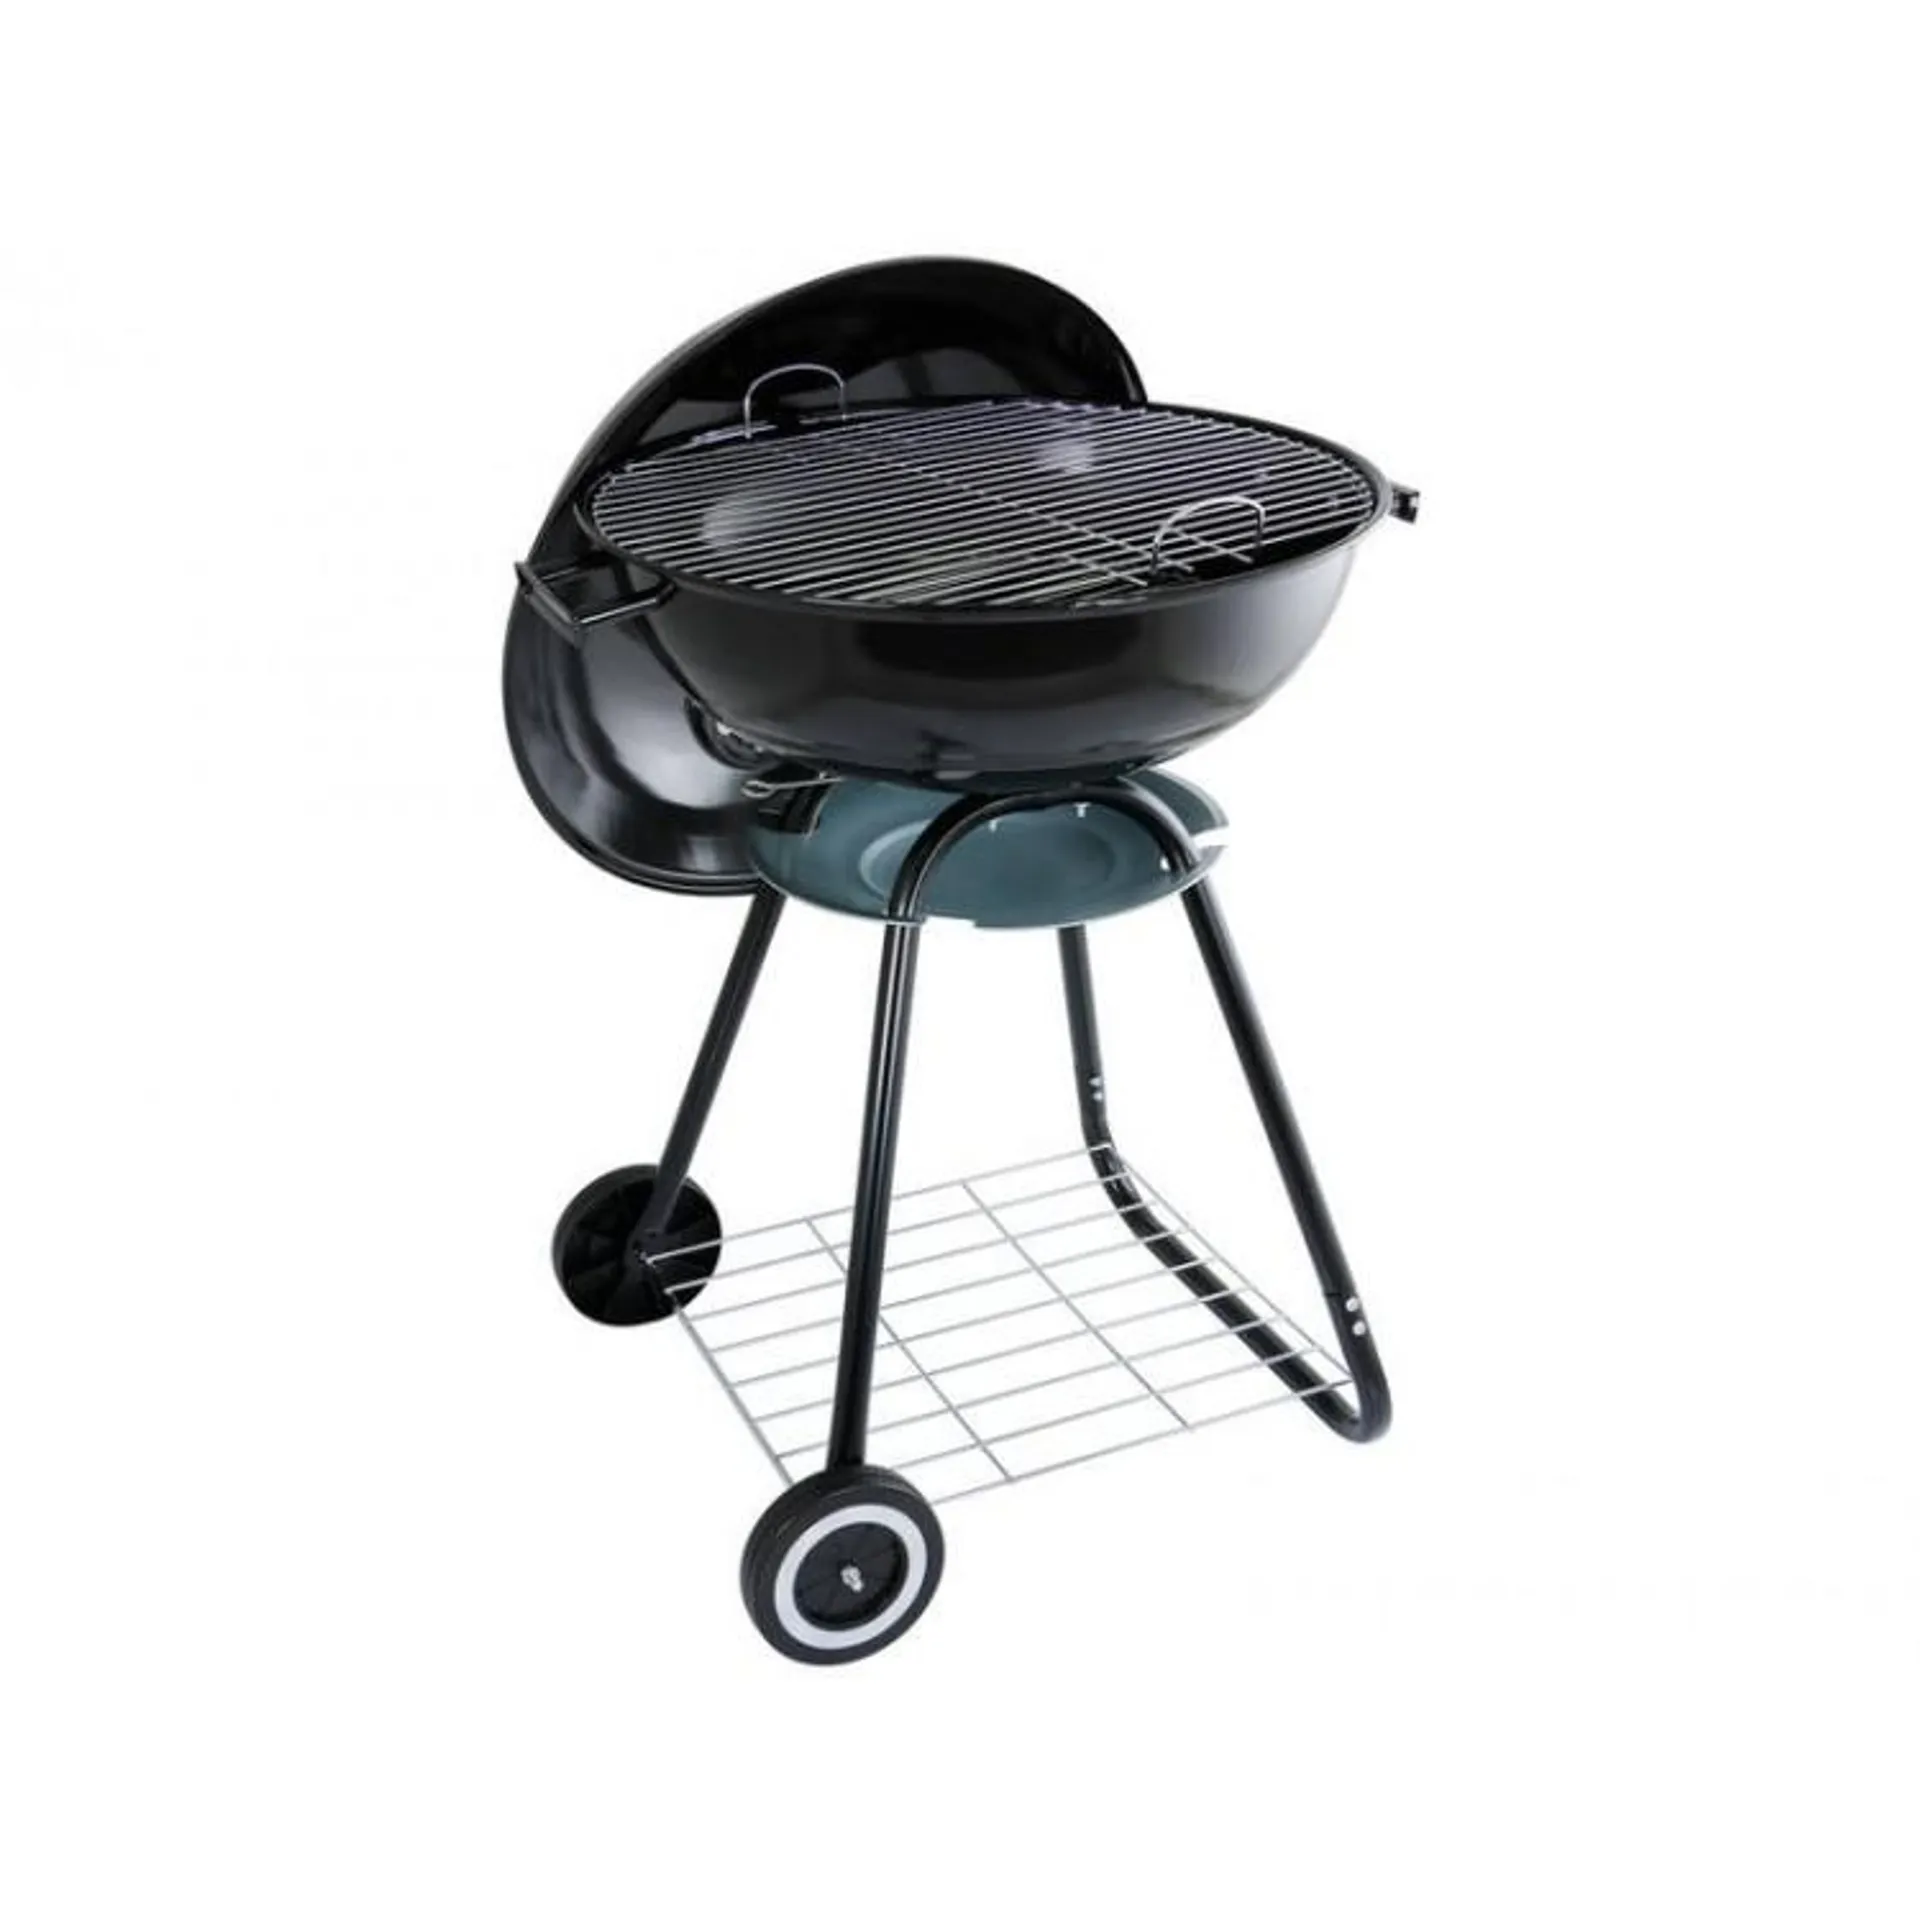 Globe Kettle BBQ - Charcoal Barbeque Grill - 57cm Dome Lid Barbecue